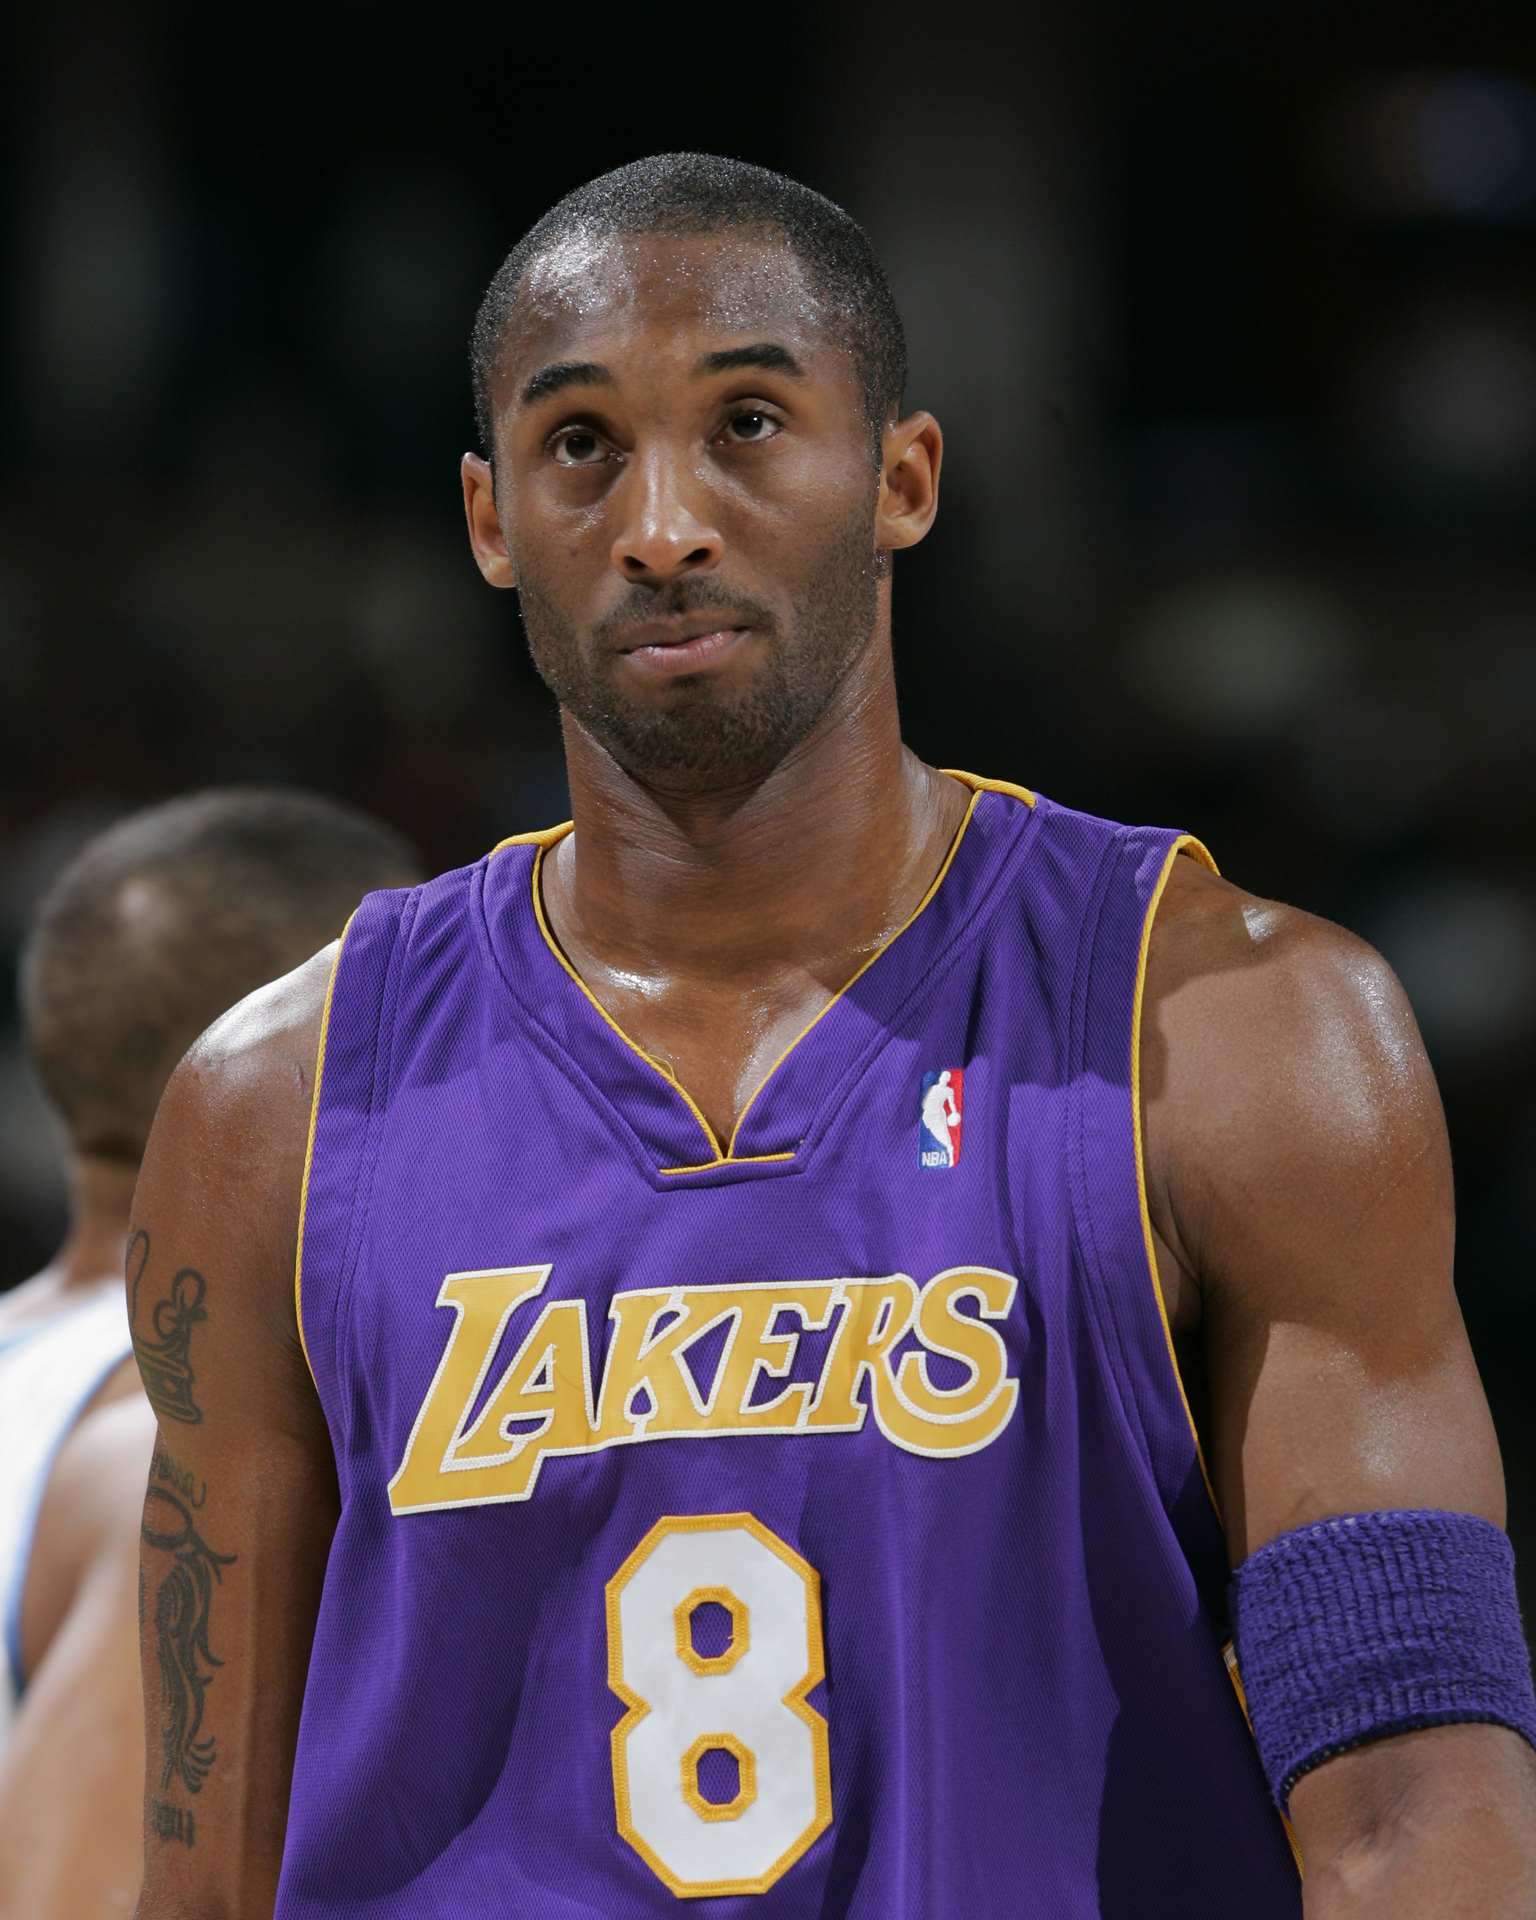 List 105+ Images show me a picture of kobe bryant Completed